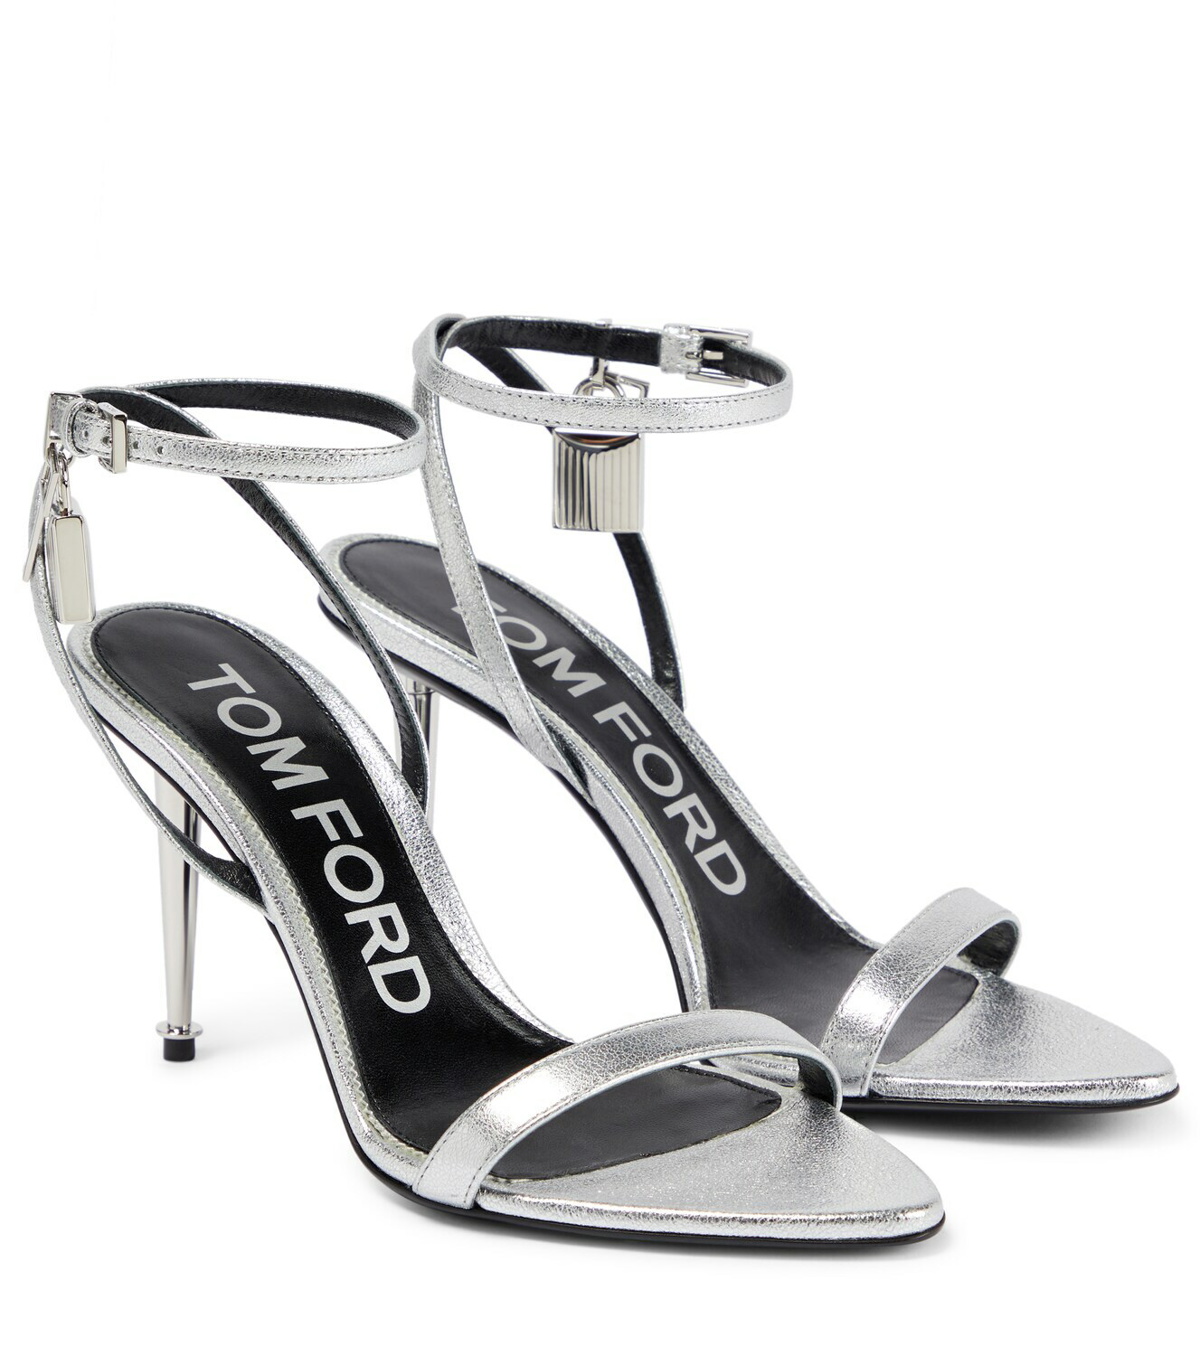 Padlock Ankle Strap Lock and Key Open Pointed Toe Heels White